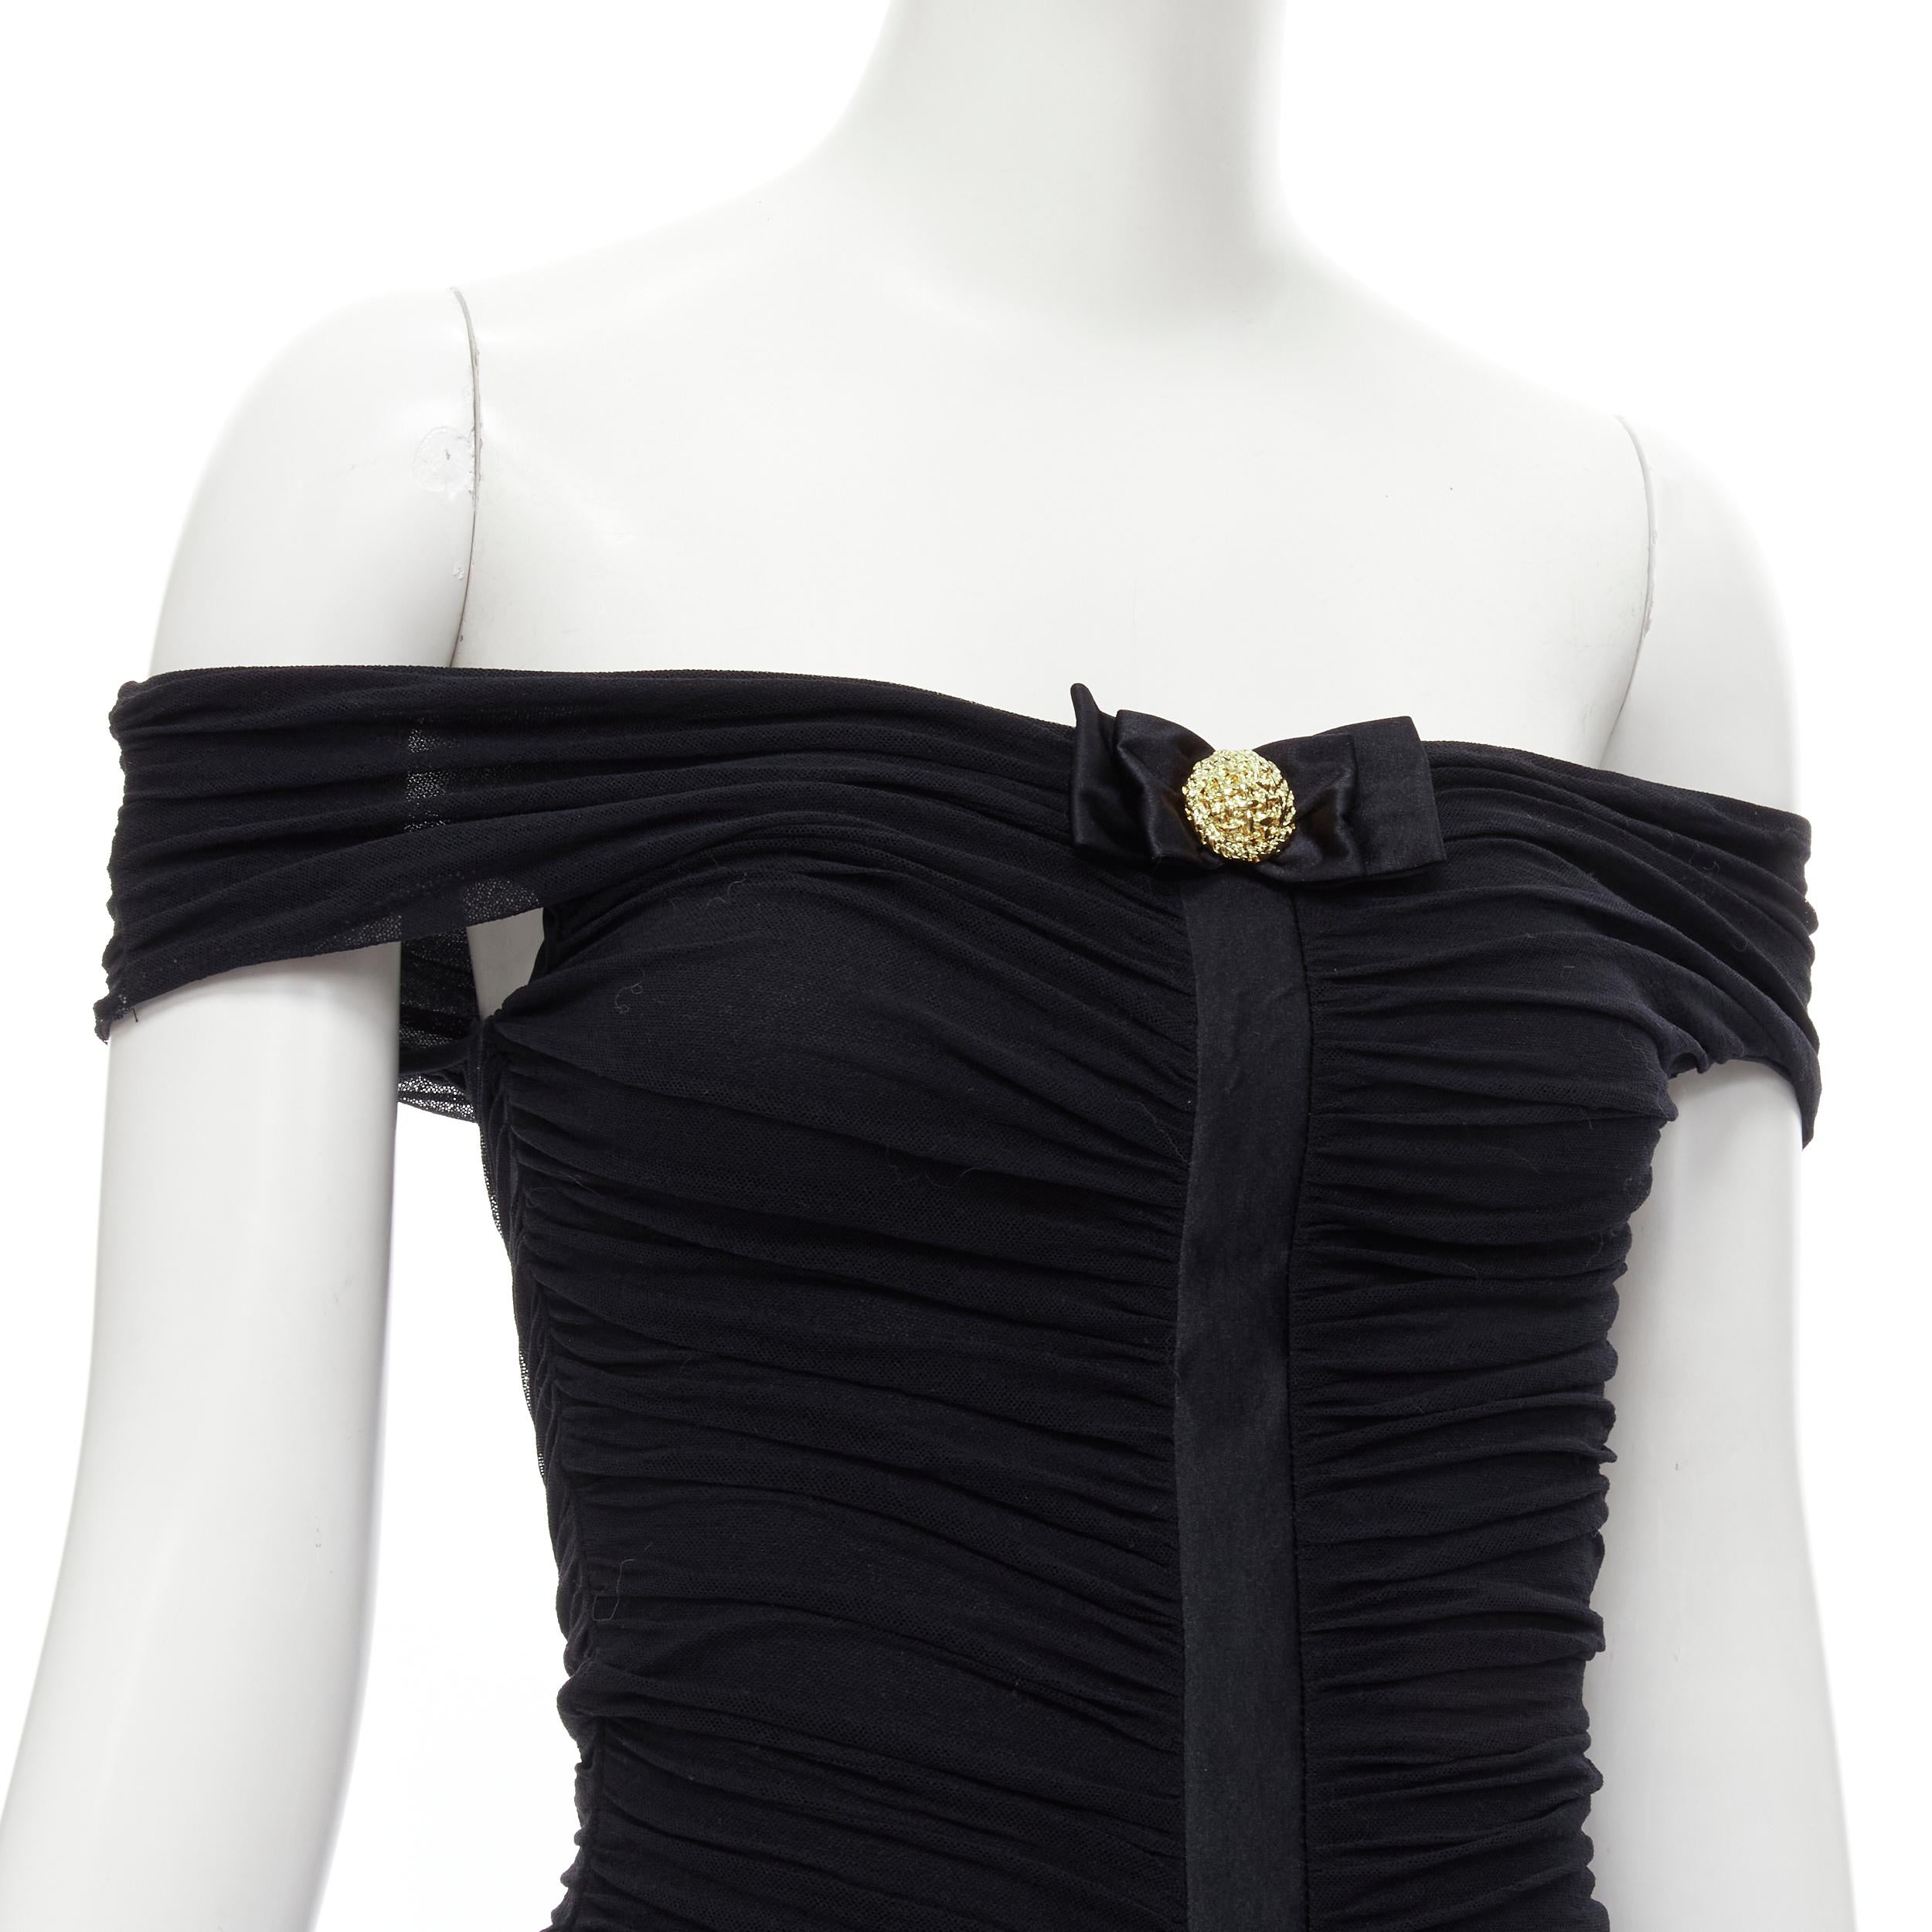 LA PERLA Vintage black gold button bow off shoulder ruched bodycon tunic IT42 M 
Reference: GIYG/A00140 
Brand: La Perla 
Material: Polyamide 
Color: Bkacj 
Pattern: Solid 
Extra Detail: Gold-tone button decorative bow. Ruched tulle. 
Made in: Italy